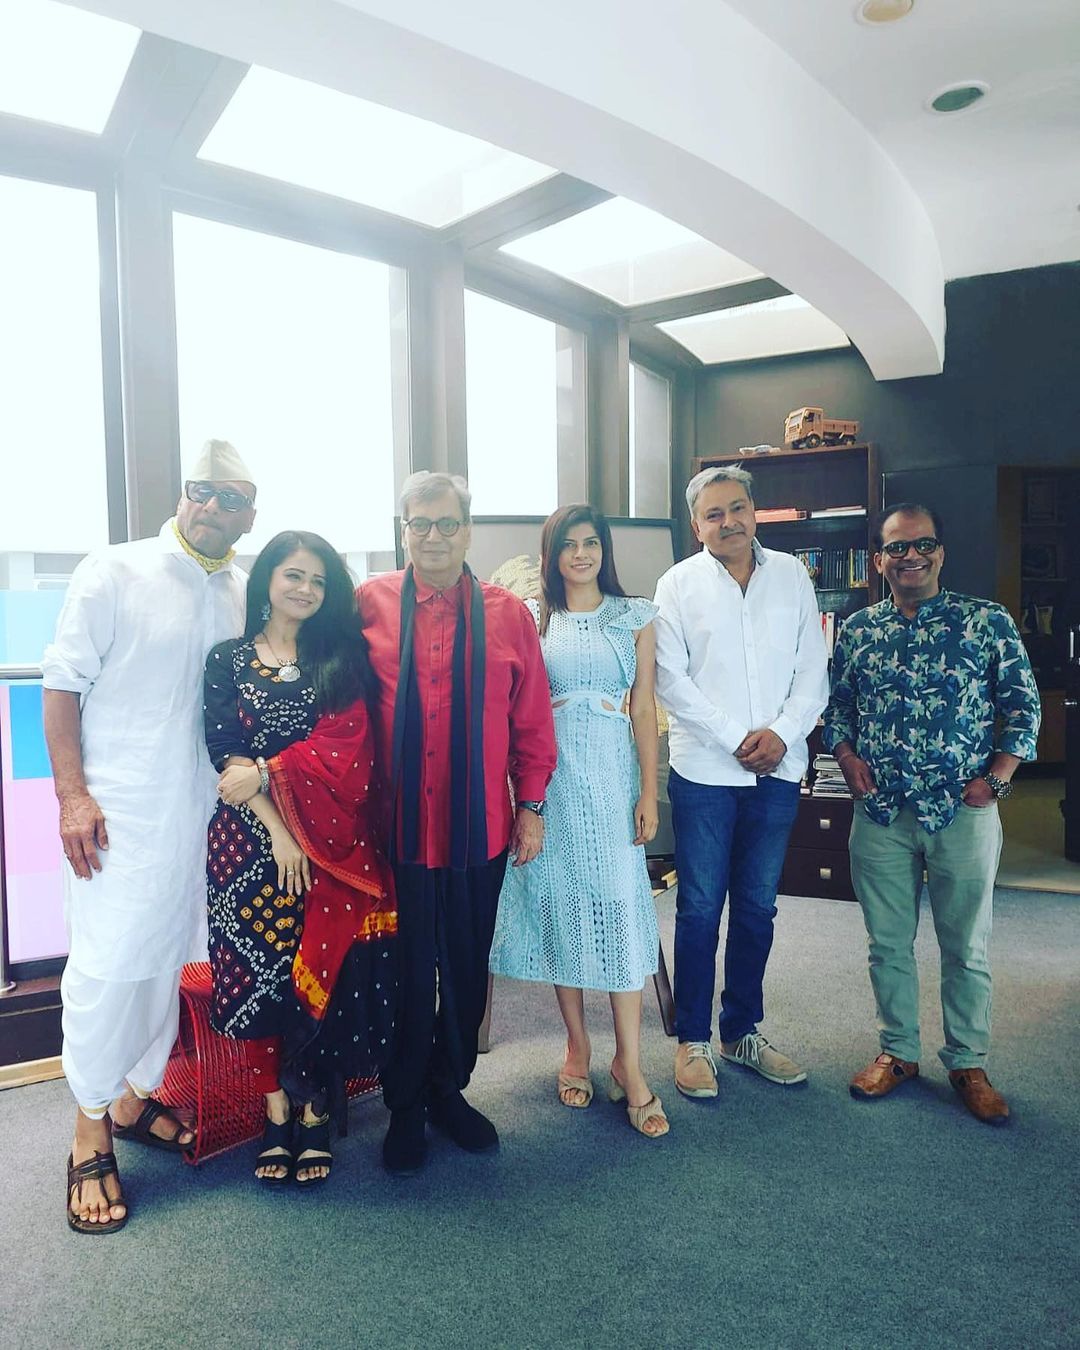 Actress Lucky Mehta Remembered Her Meeting With Filmmaker Subhash Ghai. She Said He Complimented About Her Chemistry With Co-Star Mukesh Tripathi